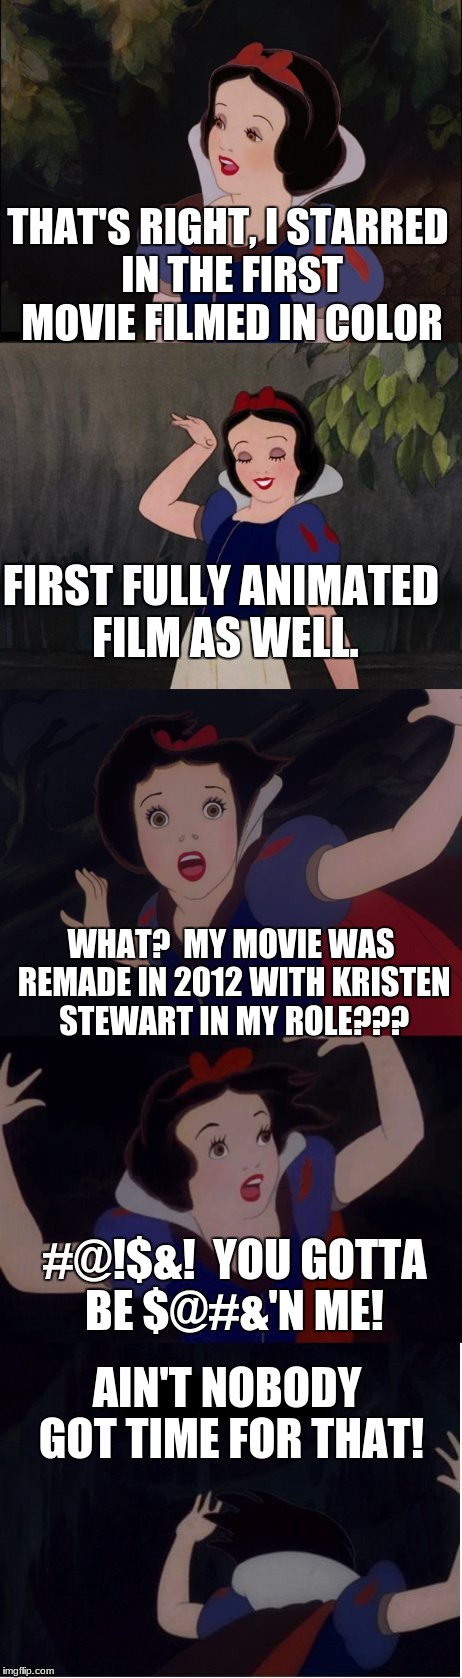 Triggered Snow White (in celebration of Triggered Fairy Tale Week) | THAT'S RIGHT, I STARRED IN THE FIRST MOVIE FILMED IN COLOR; FIRST FULLY ANIMATED FILM AS WELL. WHAT?  MY MOVIE WAS REMADE IN 2012 WITH KRISTEN STEWART IN MY ROLE??? #@!$&!  YOU GOTTA BE $@#&'N ME! AIN'T NOBODY GOT TIME FOR THAT! | image tagged in snow white,kristen stewart,funny,memes,aint nobody got time for that | made w/ Imgflip meme maker